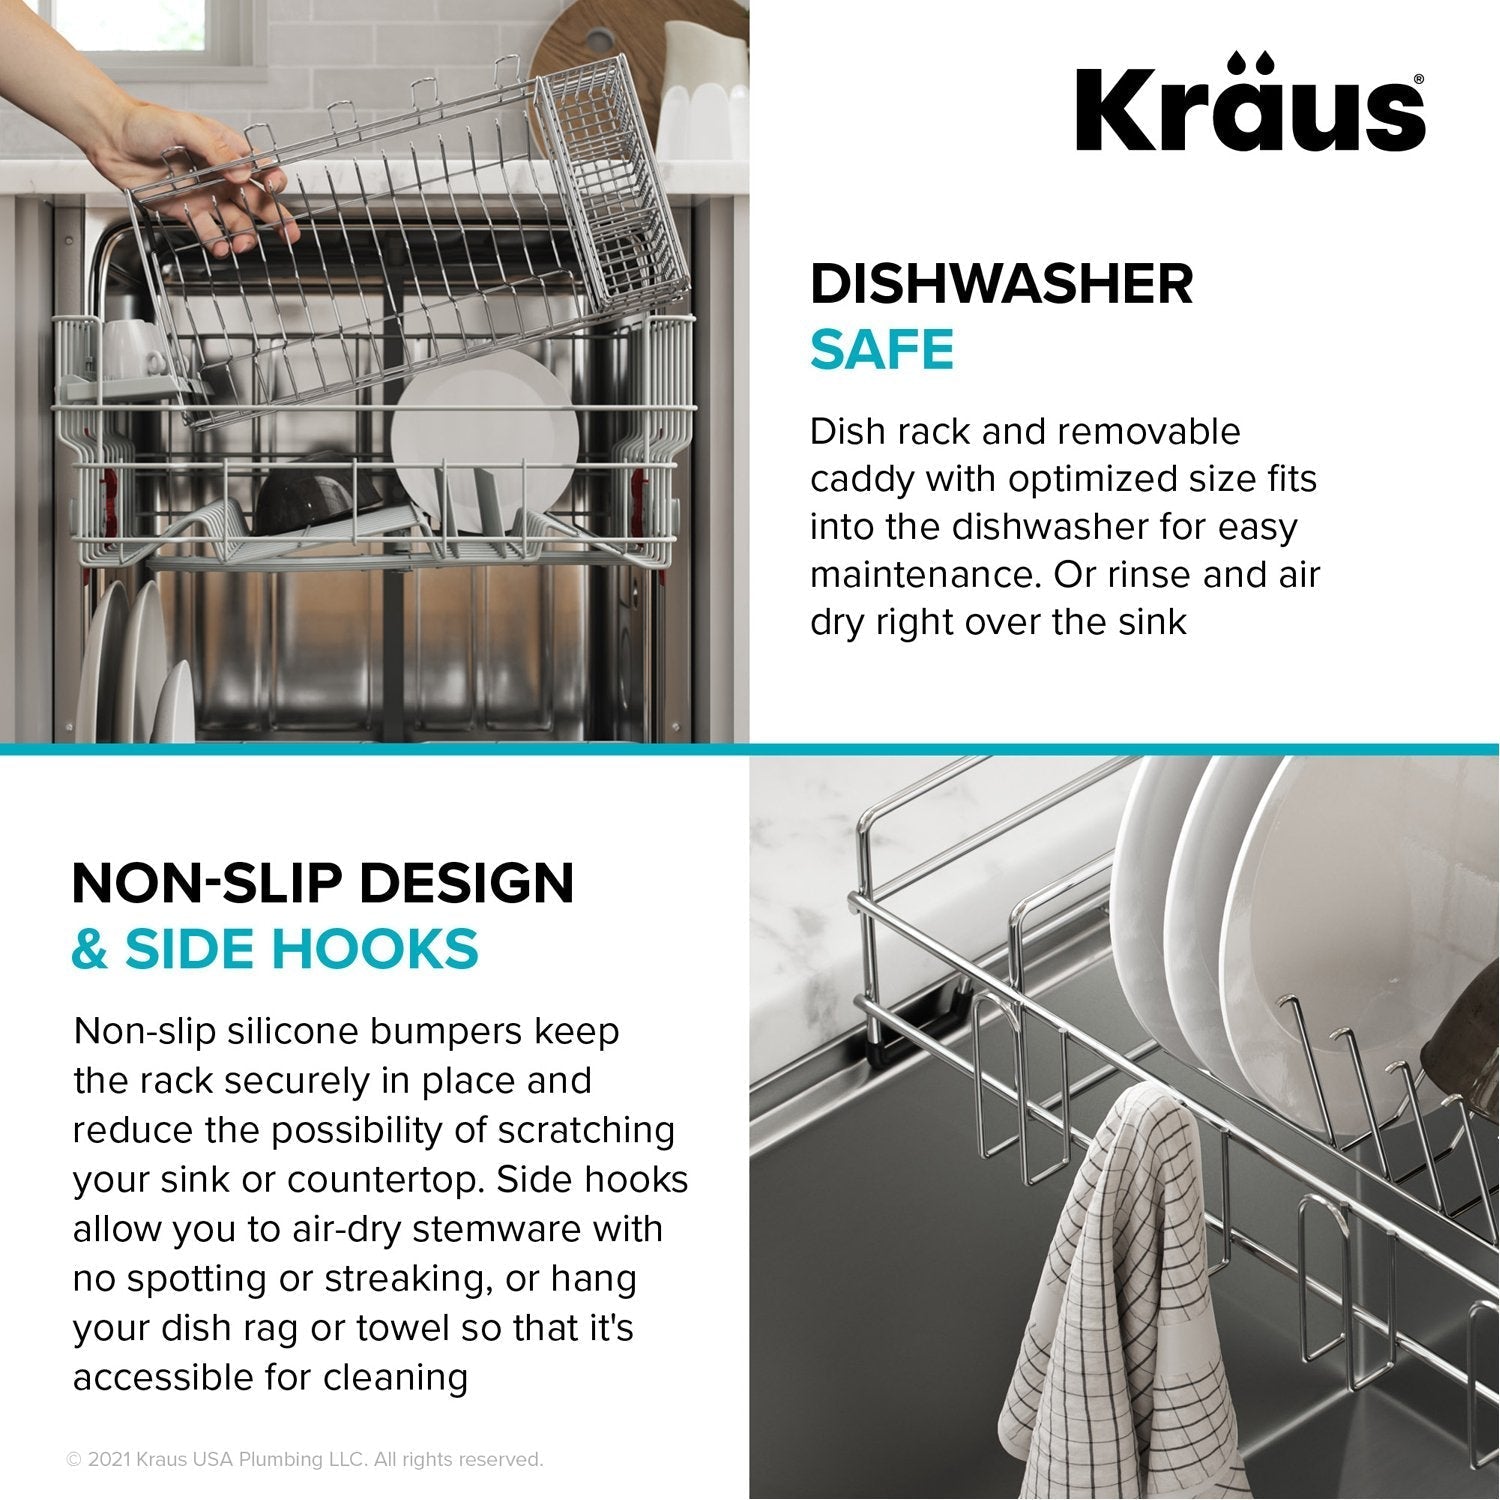 Kraus KCD-2 15.87 to 18.87 in. Multipurpose Stainless Steel Kitchen Sink Large Drying Rack - Sponge Holder, Sink Caddy with Towel Bar